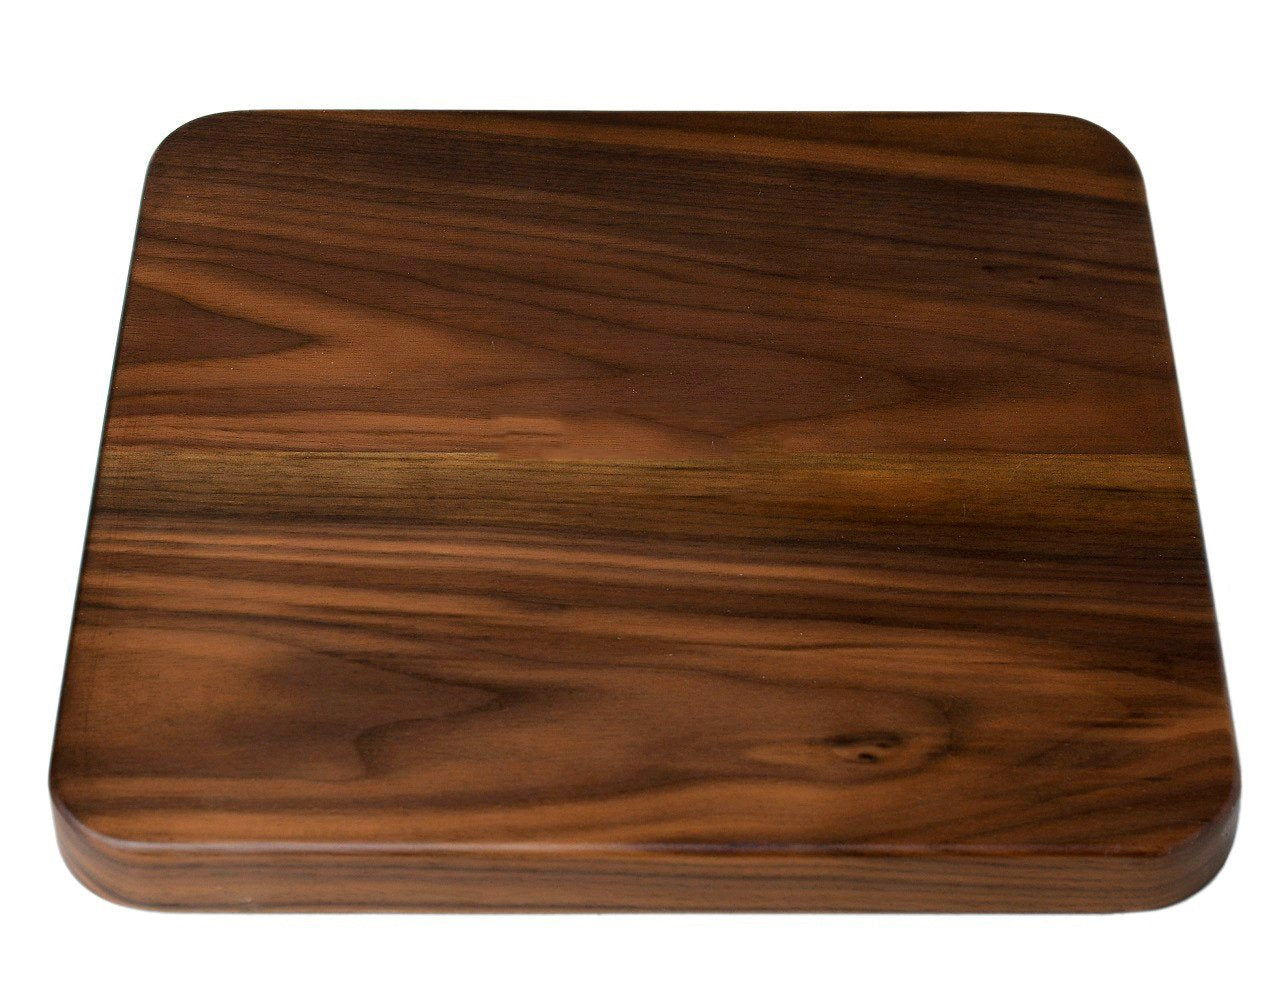 Rustic Walnut Wooden Tray Solid Wood Serving Tray Square Rectangle Platter Tea Tray Coffee Table Tray (Square Large (9 x 9 inch))